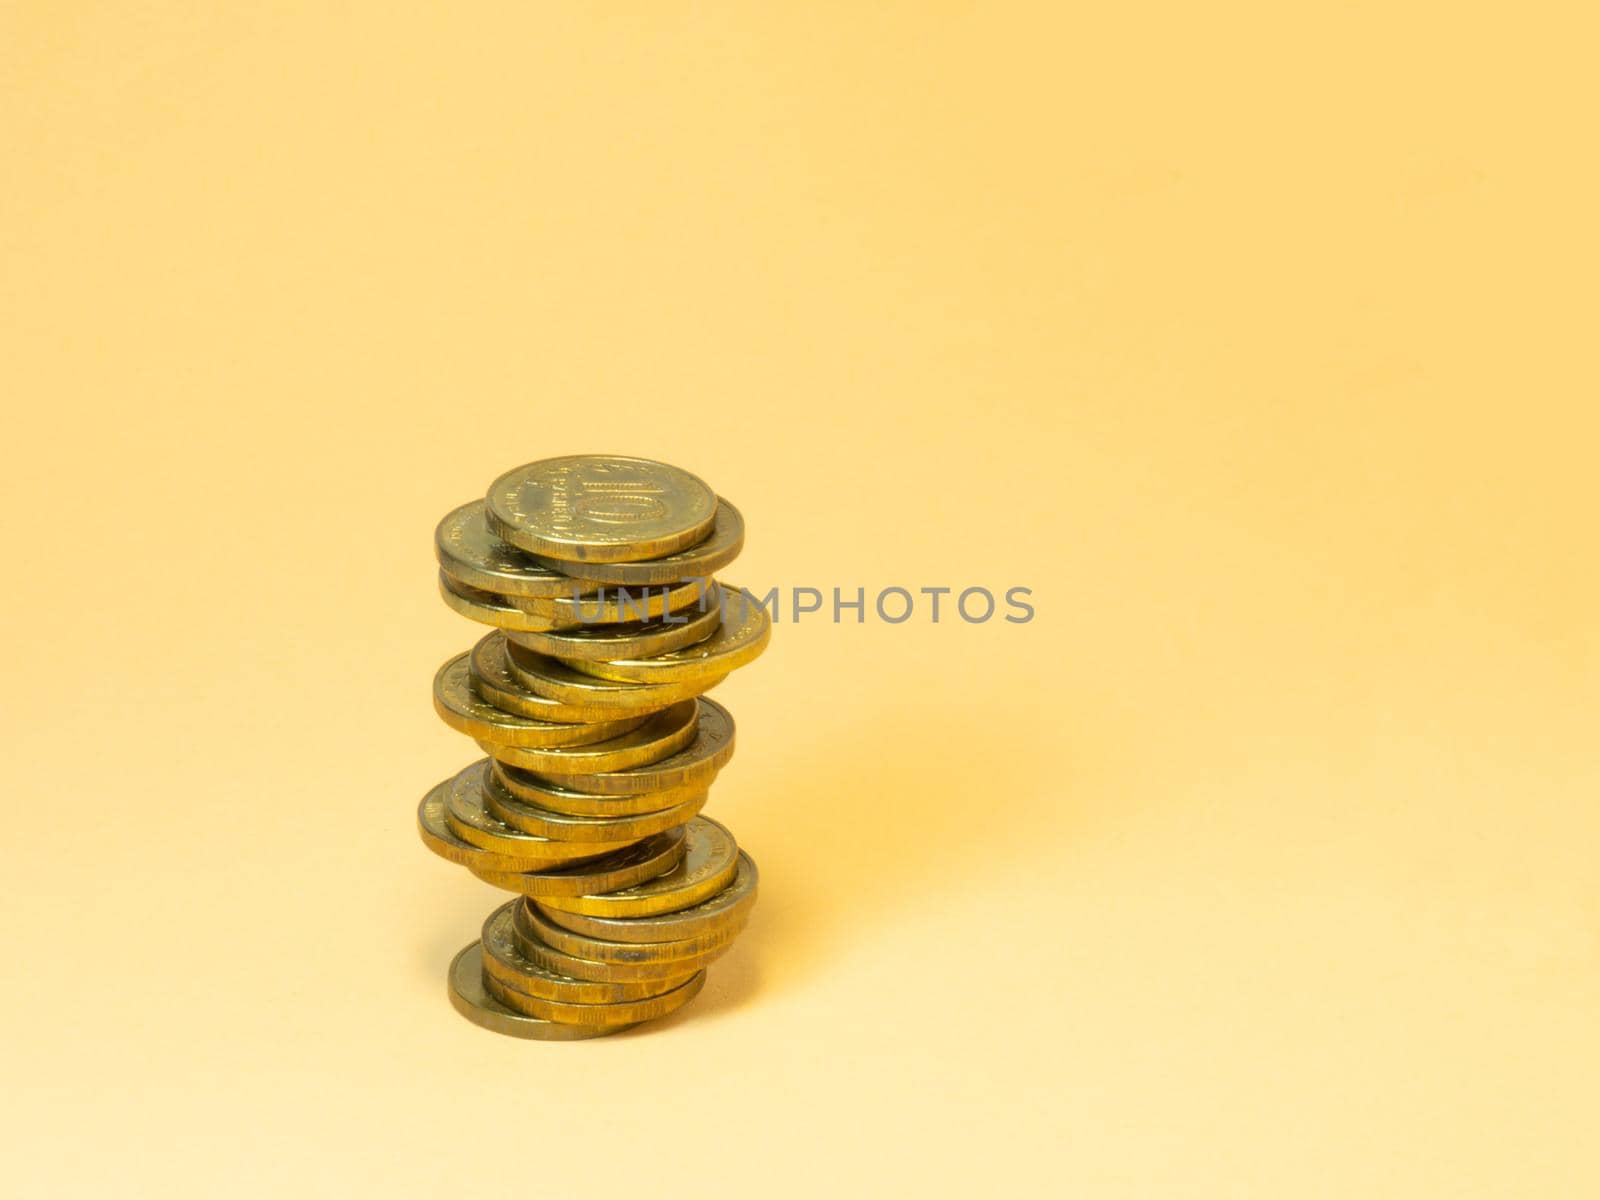 A turret made of coins. Money on yellow background
